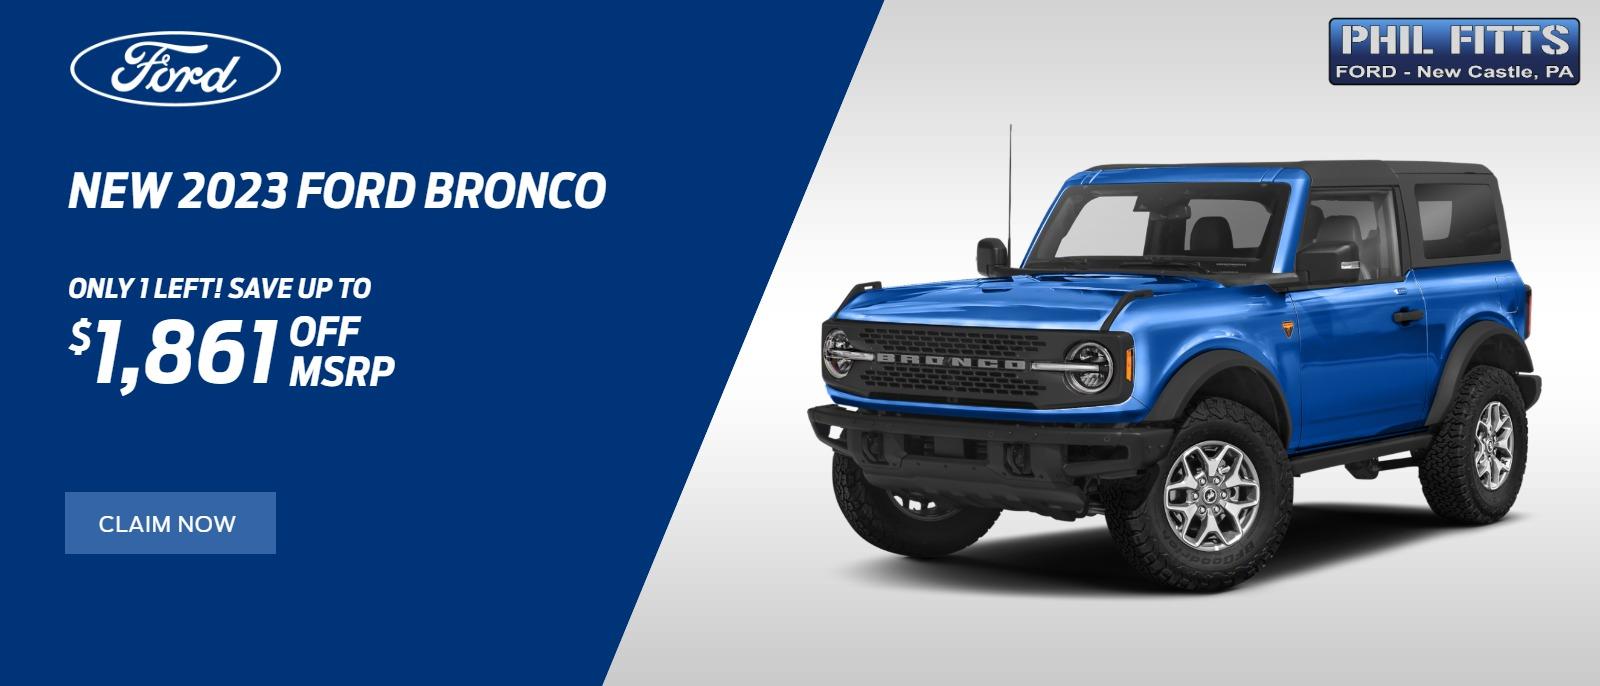 NEW 2023 Ford Bronco
Only 1 Left! Save Up To $1,861!